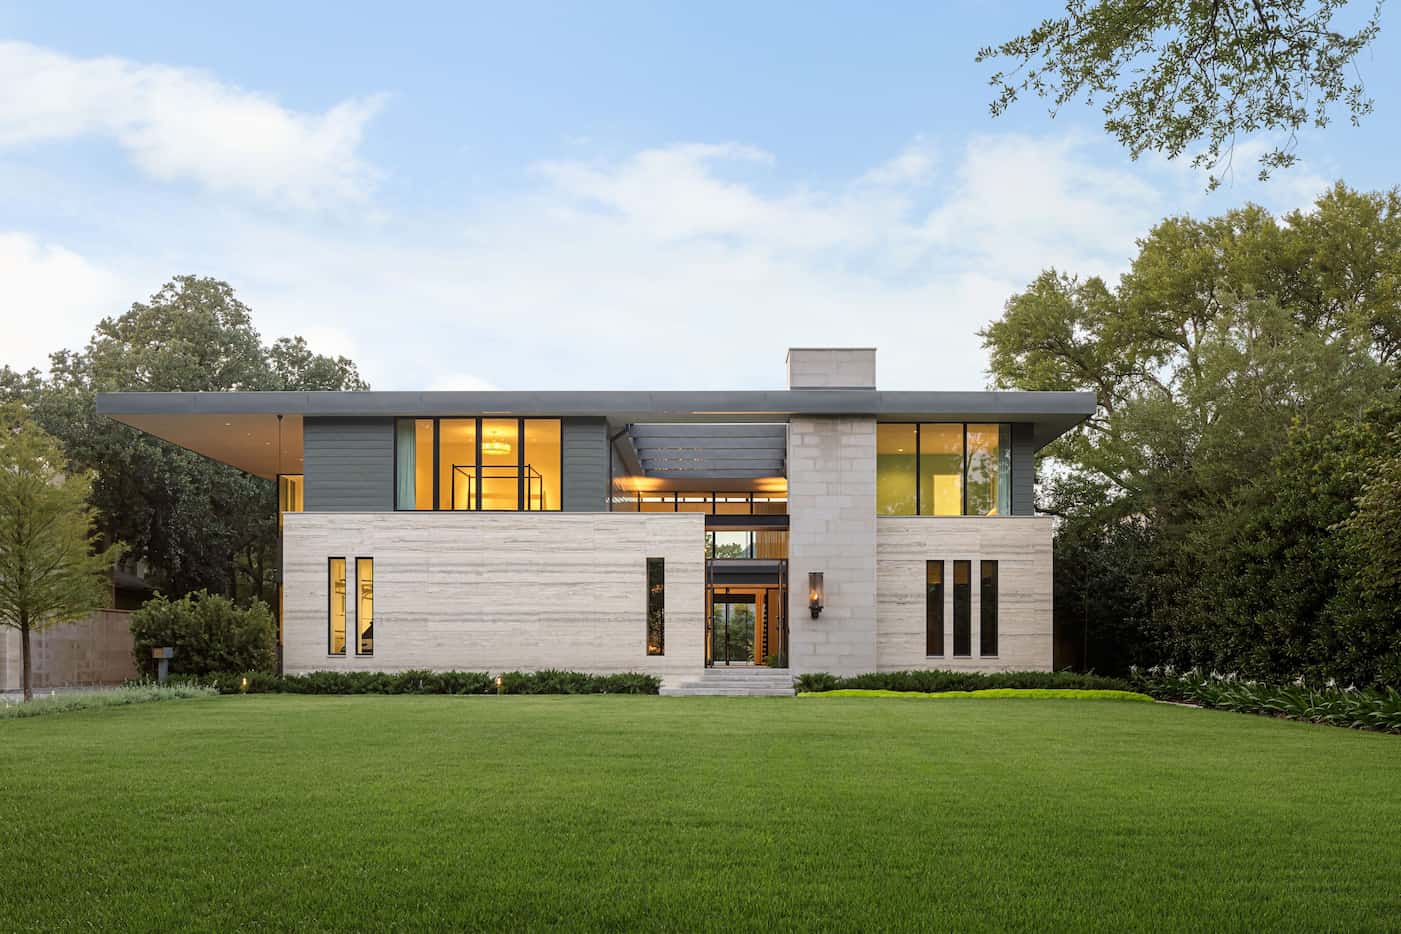 The $13.4 million contemporary estate at 4020 Glenwick Lane in University Park was the most...